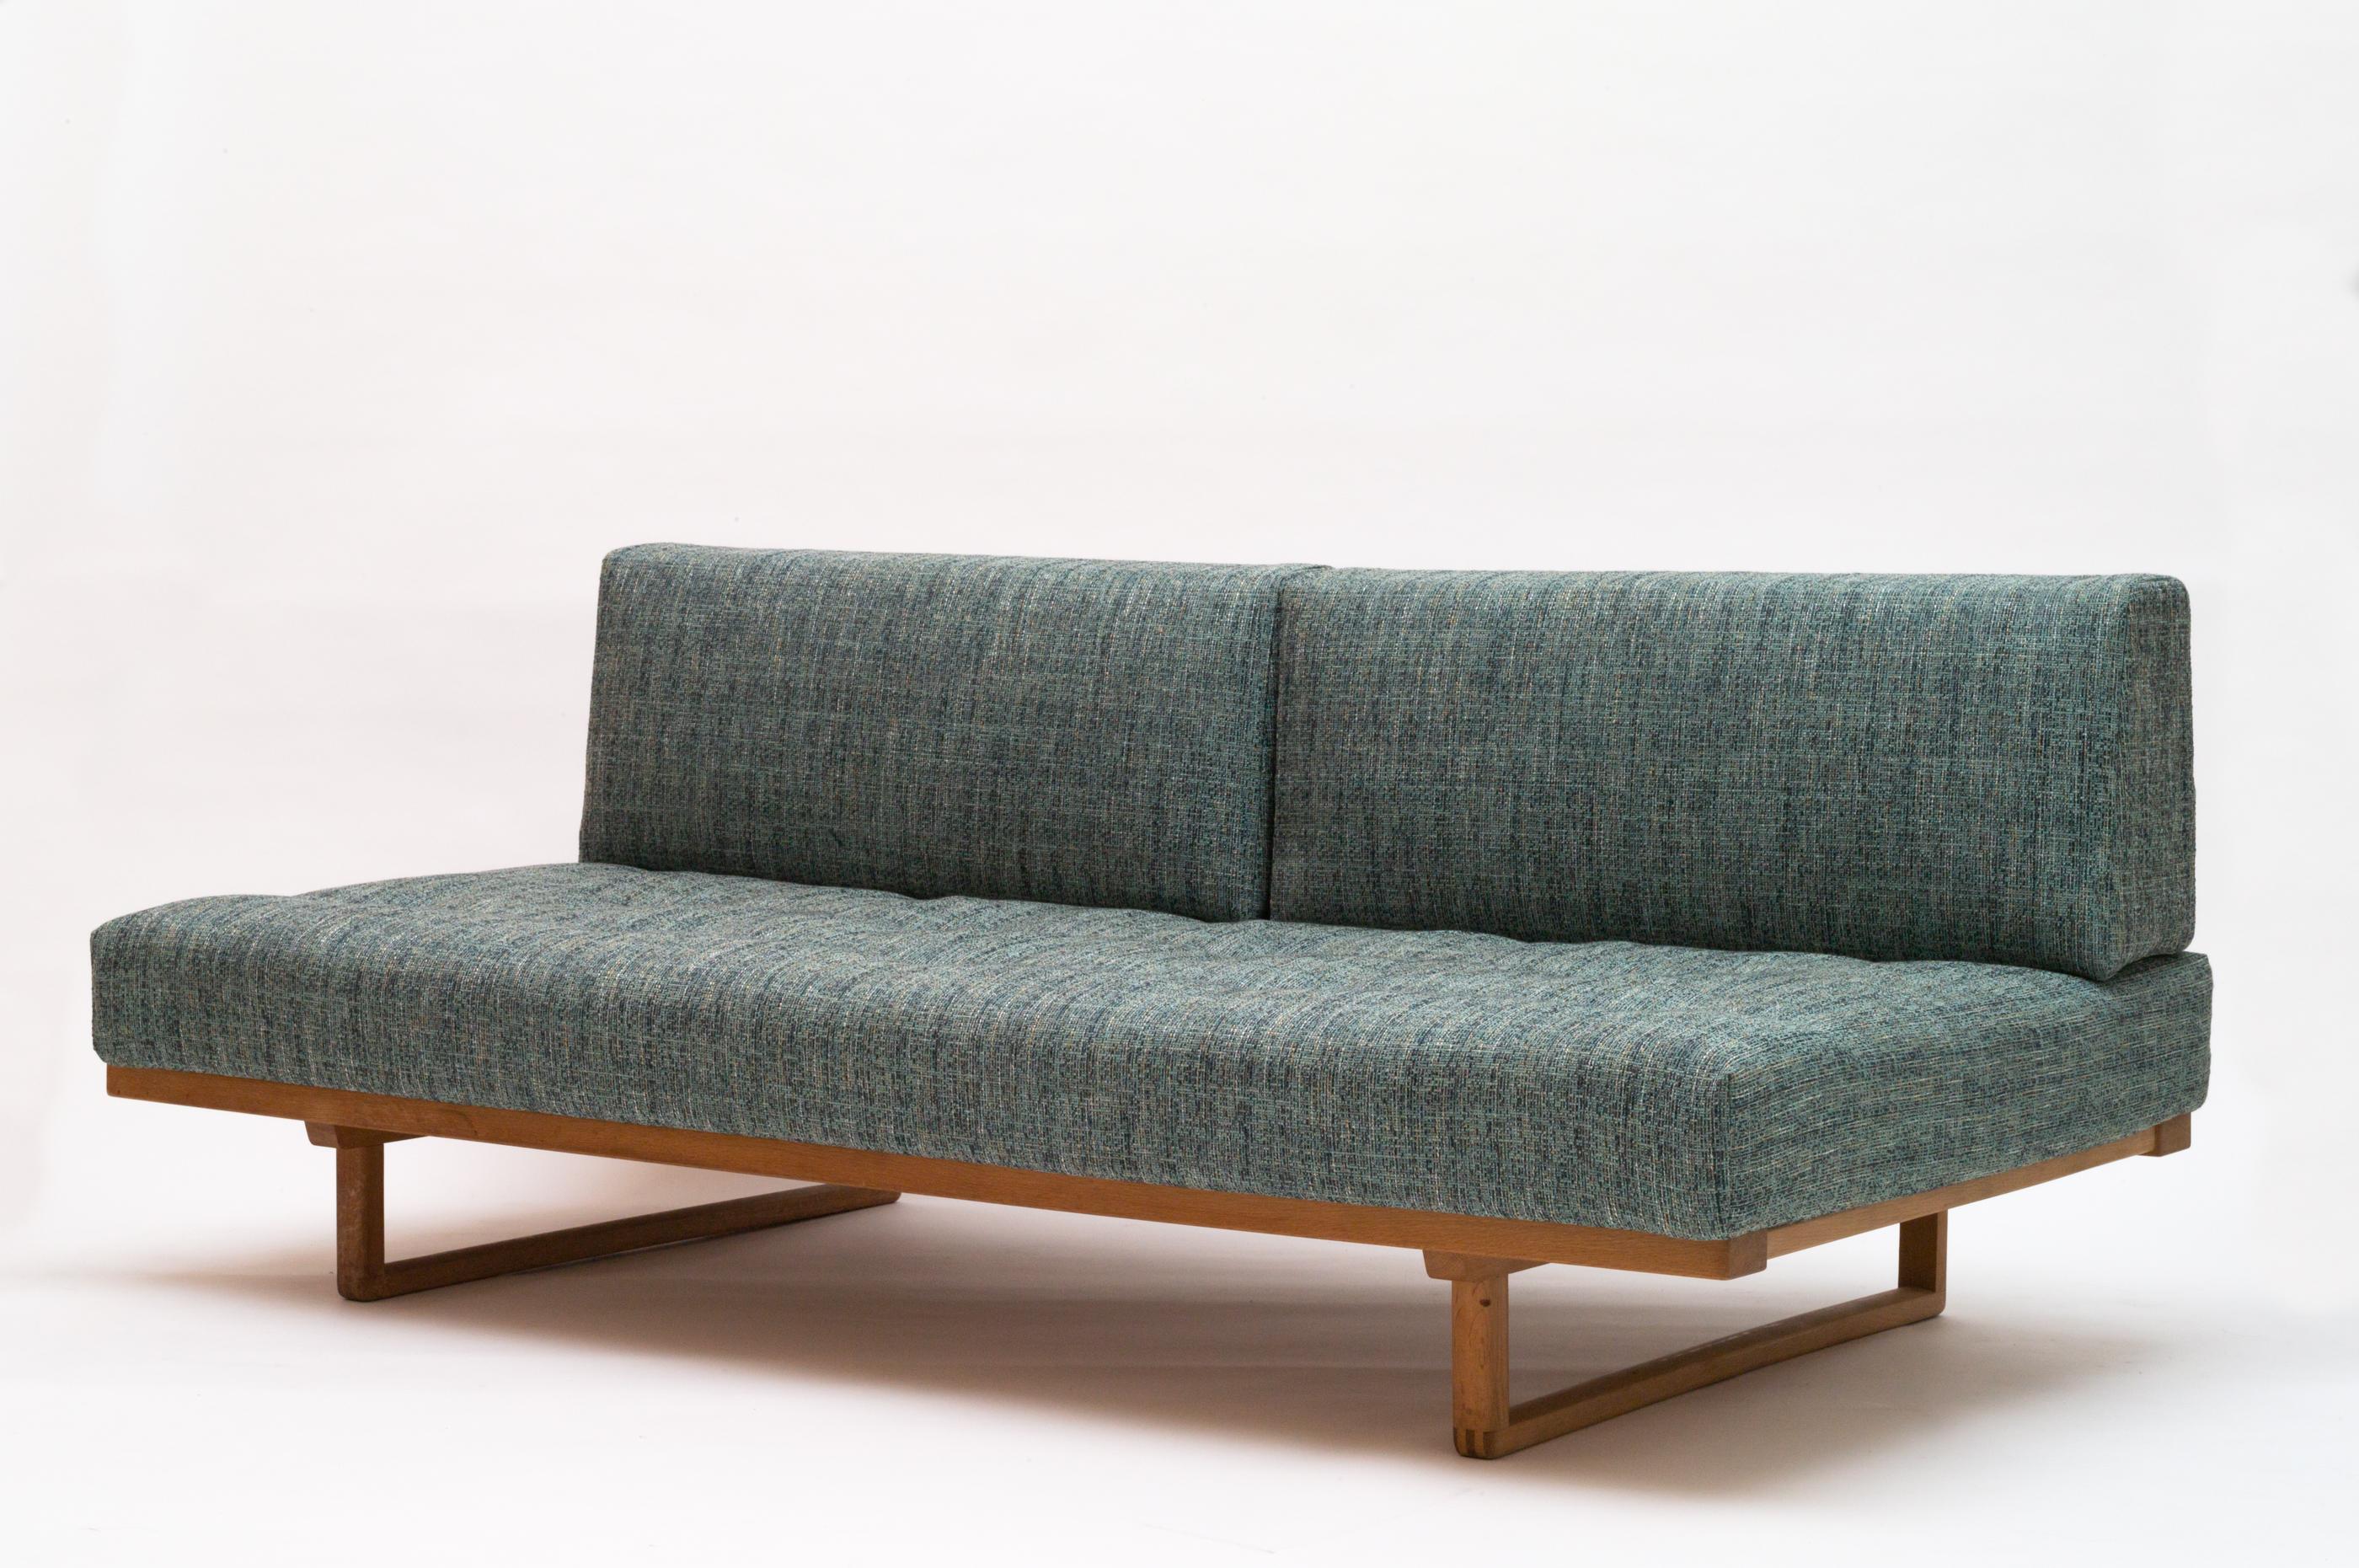 Oak daybed/sofa designed by Børge Mogensen for Fredericia Stolefabrik in Denmark 1950s. Original spring cushions newly reupholstered in 